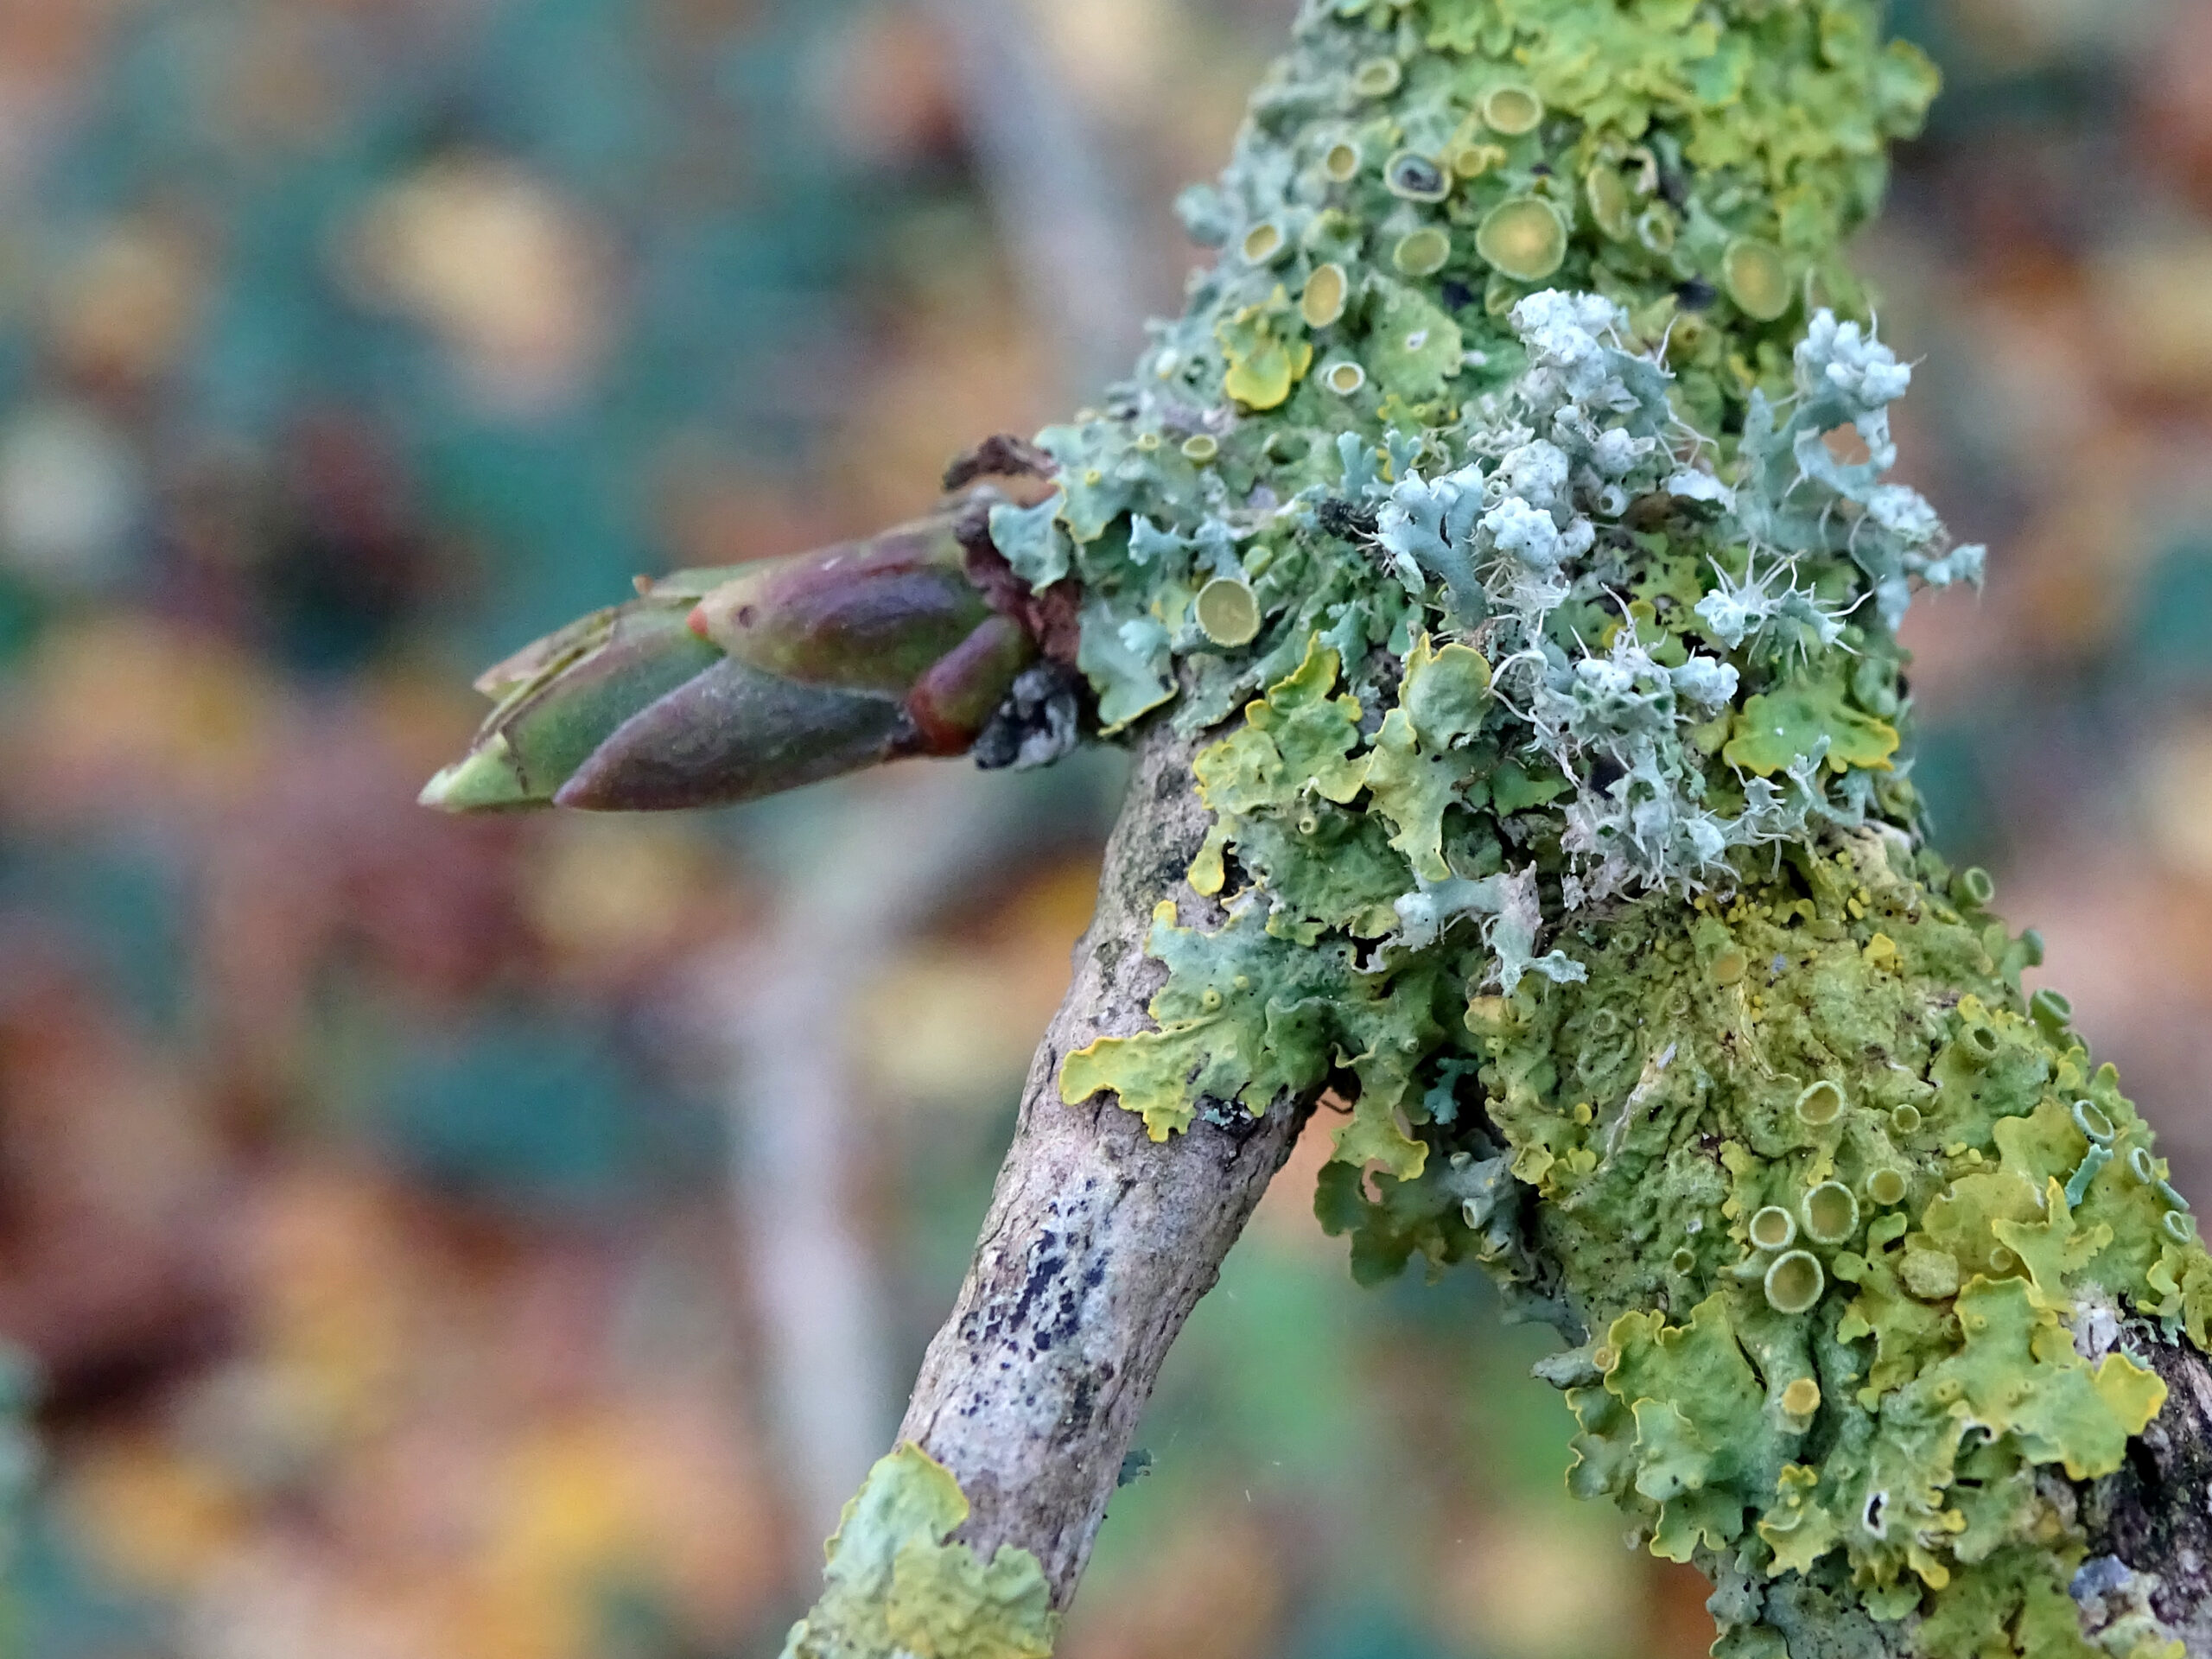 multiple lichen types on a budding branch